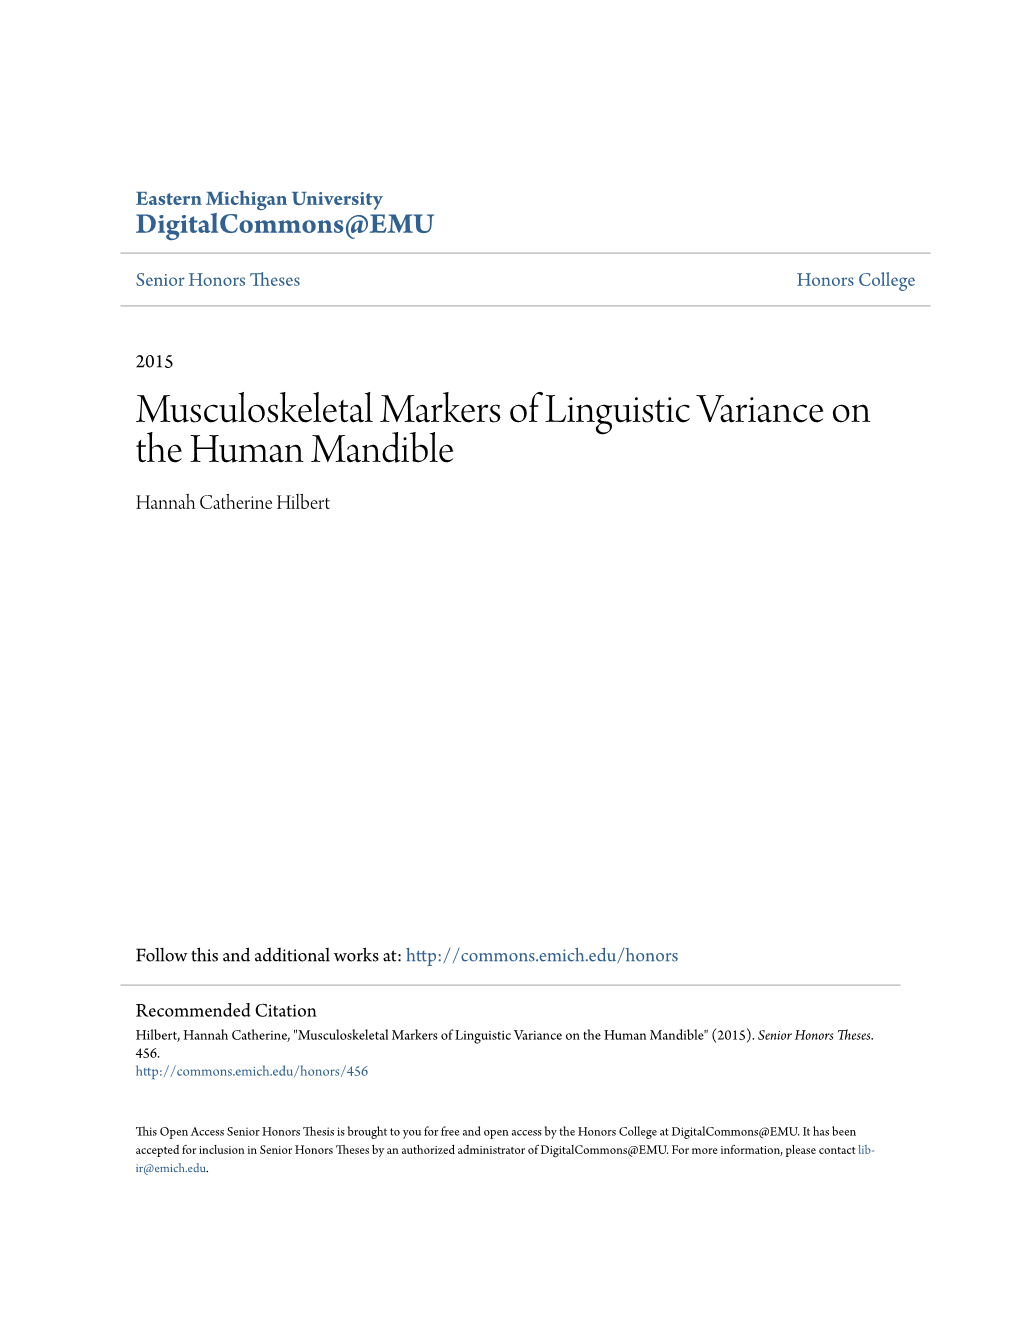 Musculoskeletal Markers of Linguistic Variance on the Human Mandible Hannah Catherine Hilbert